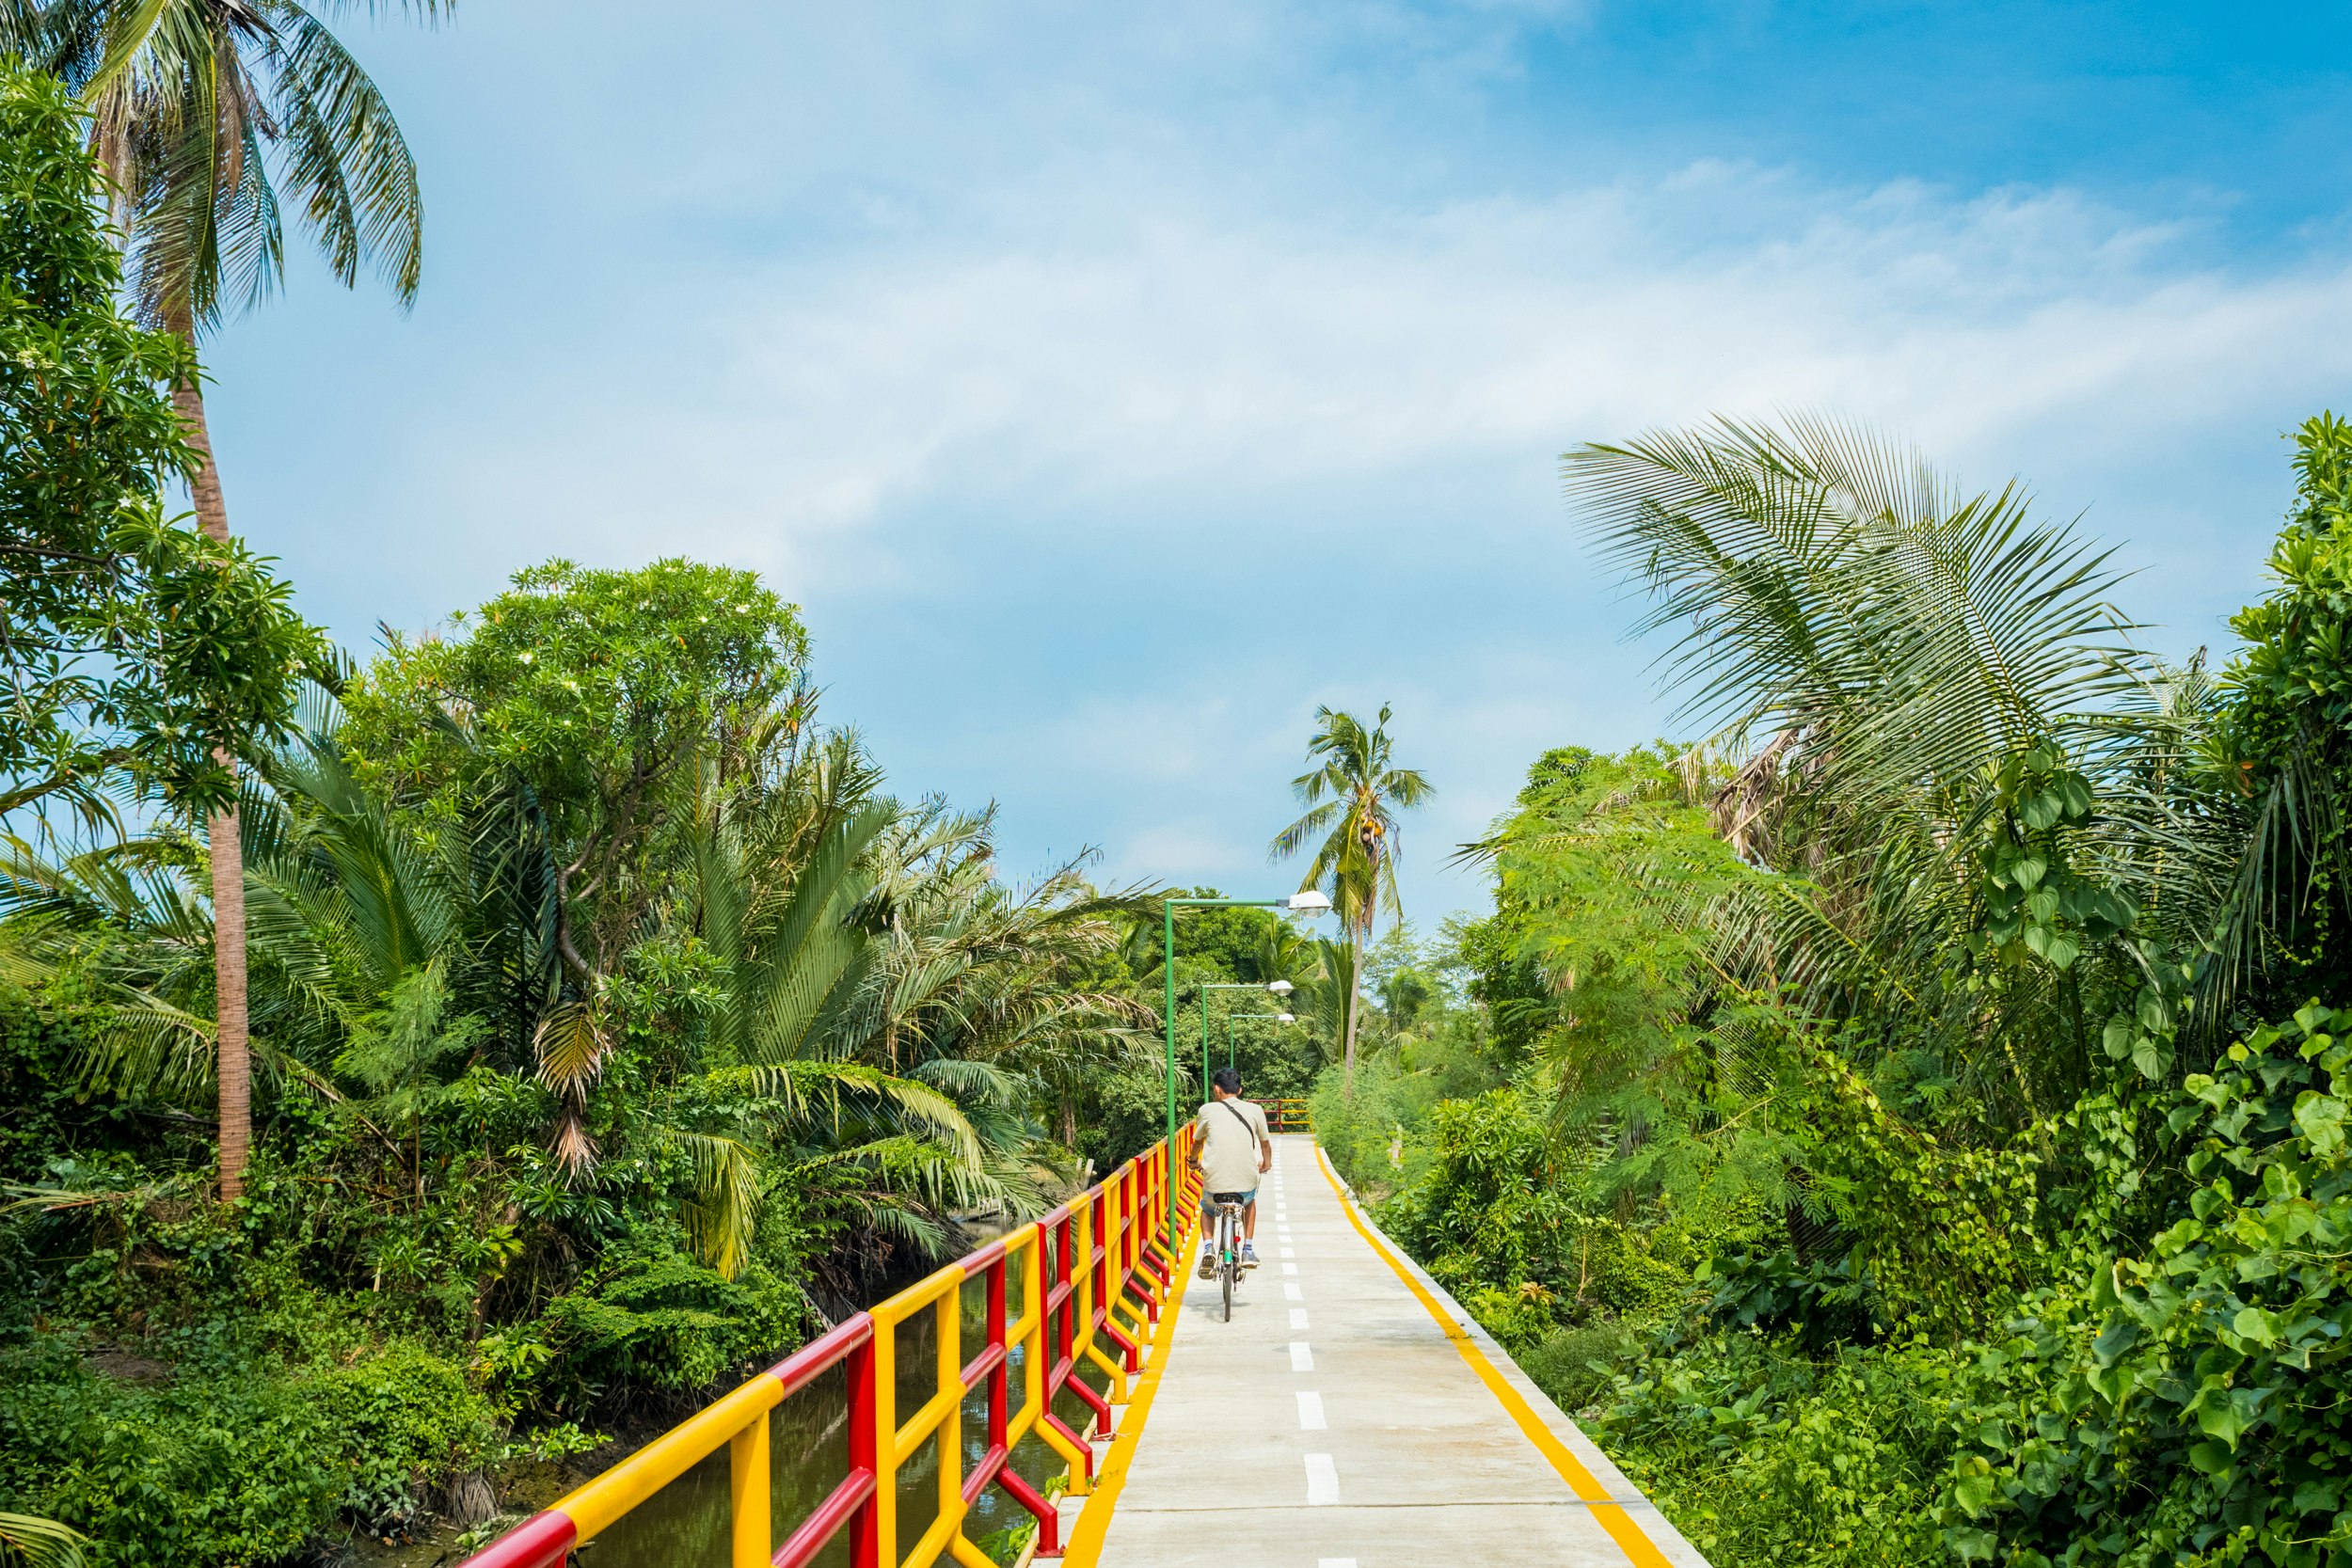 A cycle path with yellow-and-red railings stretches into the distance. Palm fronds and other green plant life surrounds the pathway